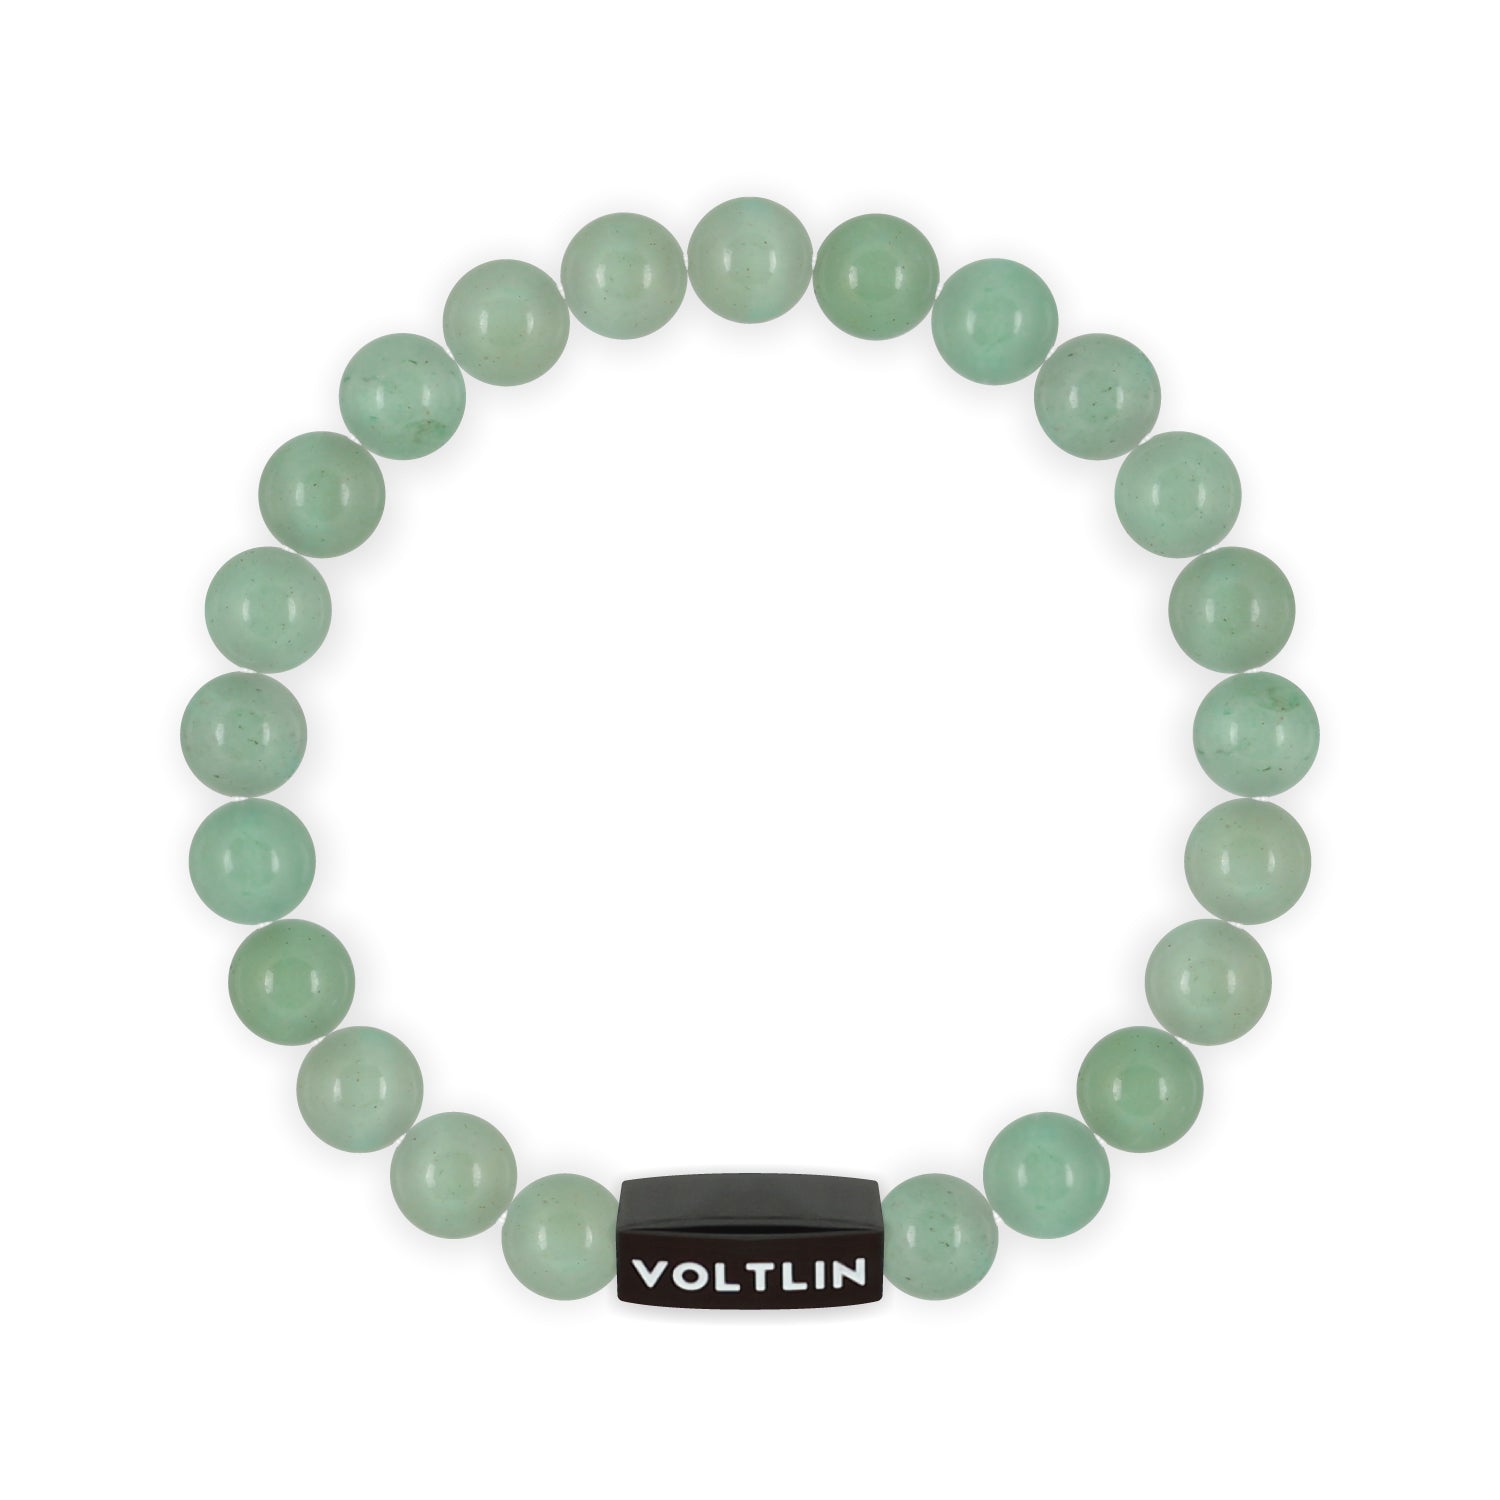 Front view of an 8mm Green Aventurine crystal beaded stretch bracelet with black stainless steel logo bead made by Voltlin